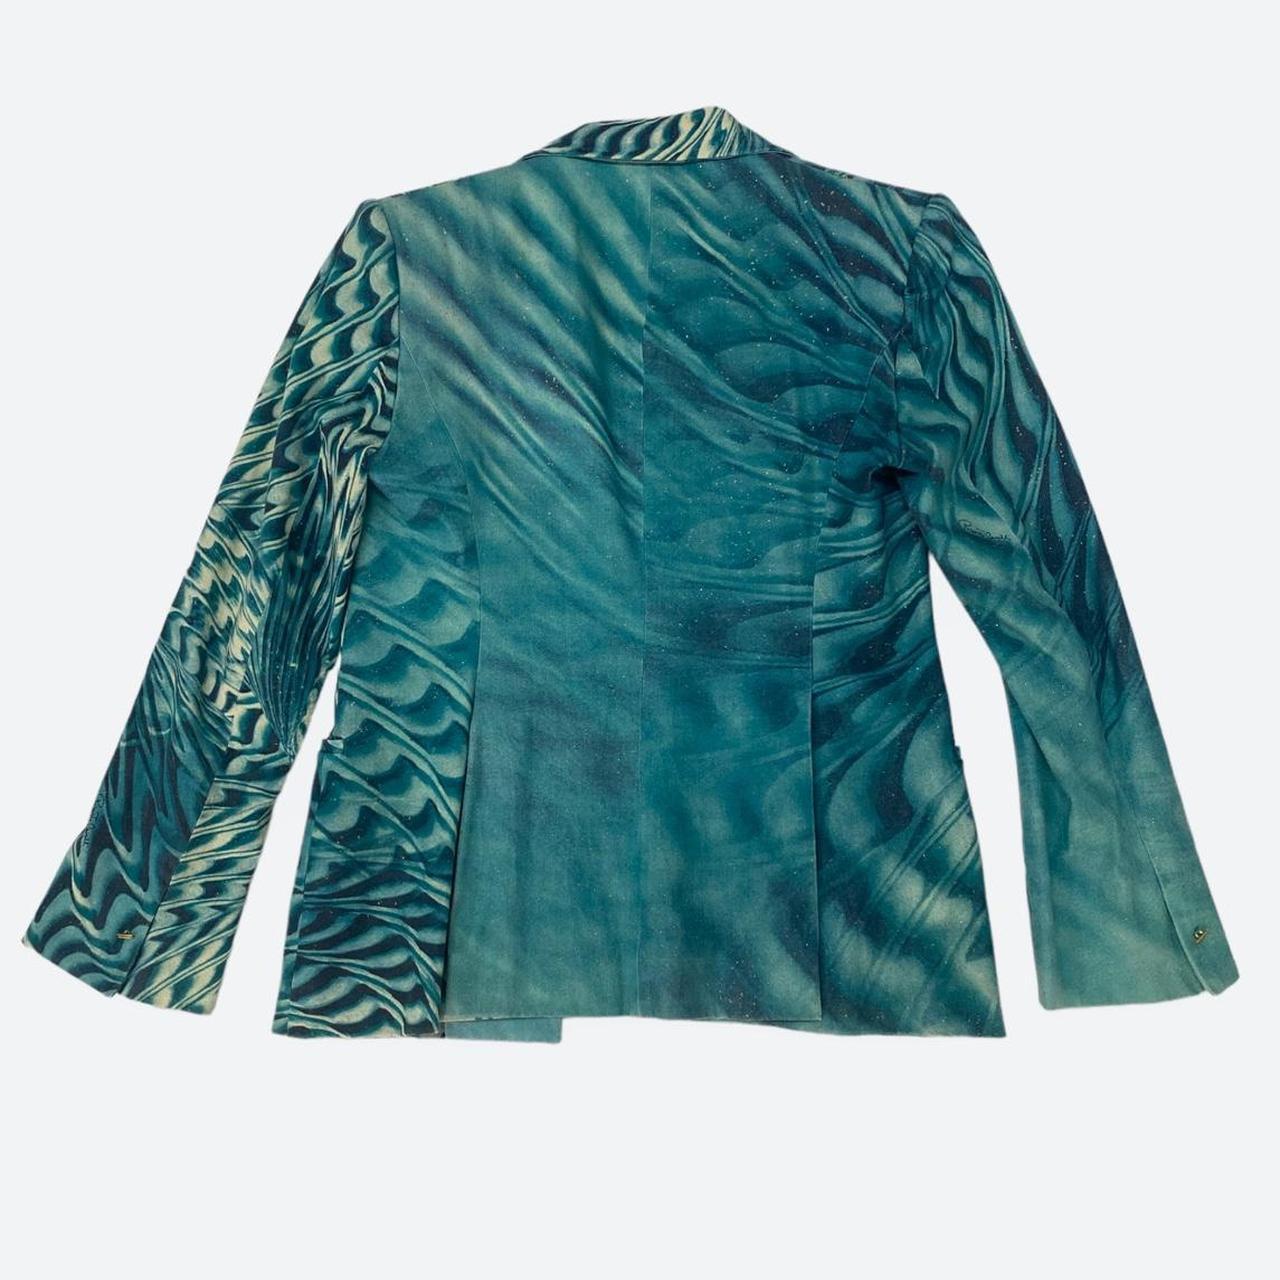 The teal blue swirling print of this blazer twists and centres in the left side of the jacket’s chest, creating a stunning dynamic illusion to a classic, formal type of garment. The jacket is also adorned with small gold specks printed all over the